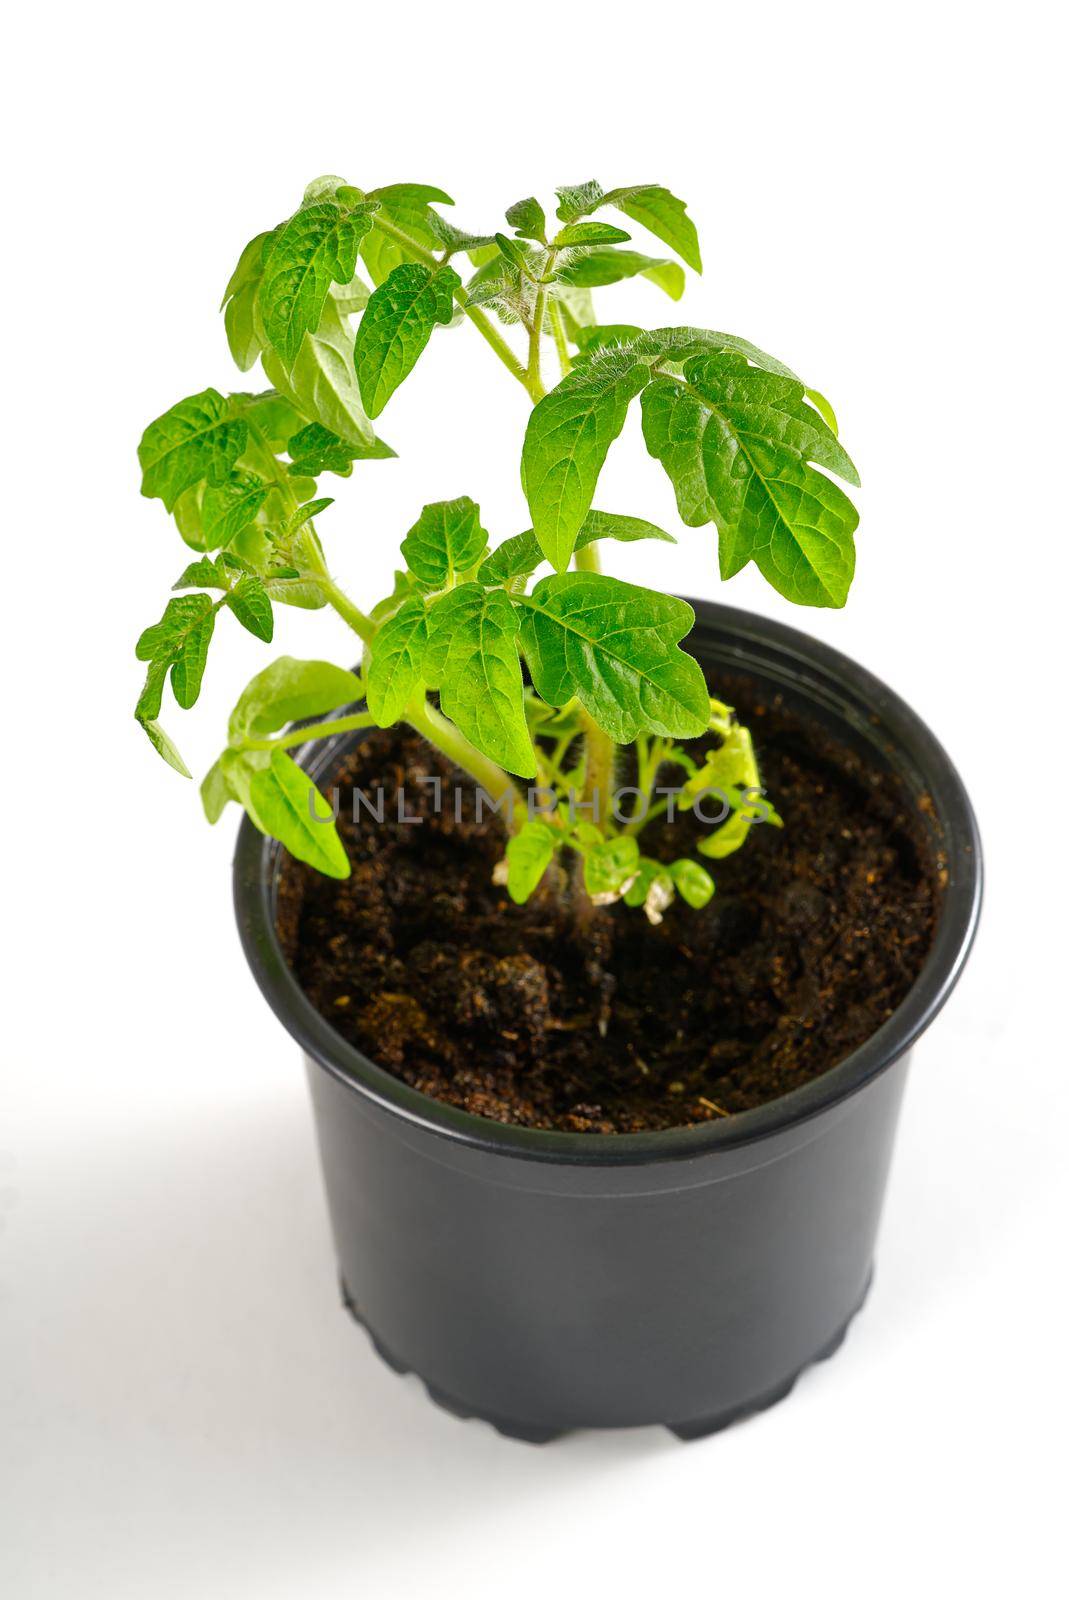 Green tomato seedling sprouts in black pot isolated on white background Spring concept for gardening by PhotoTime